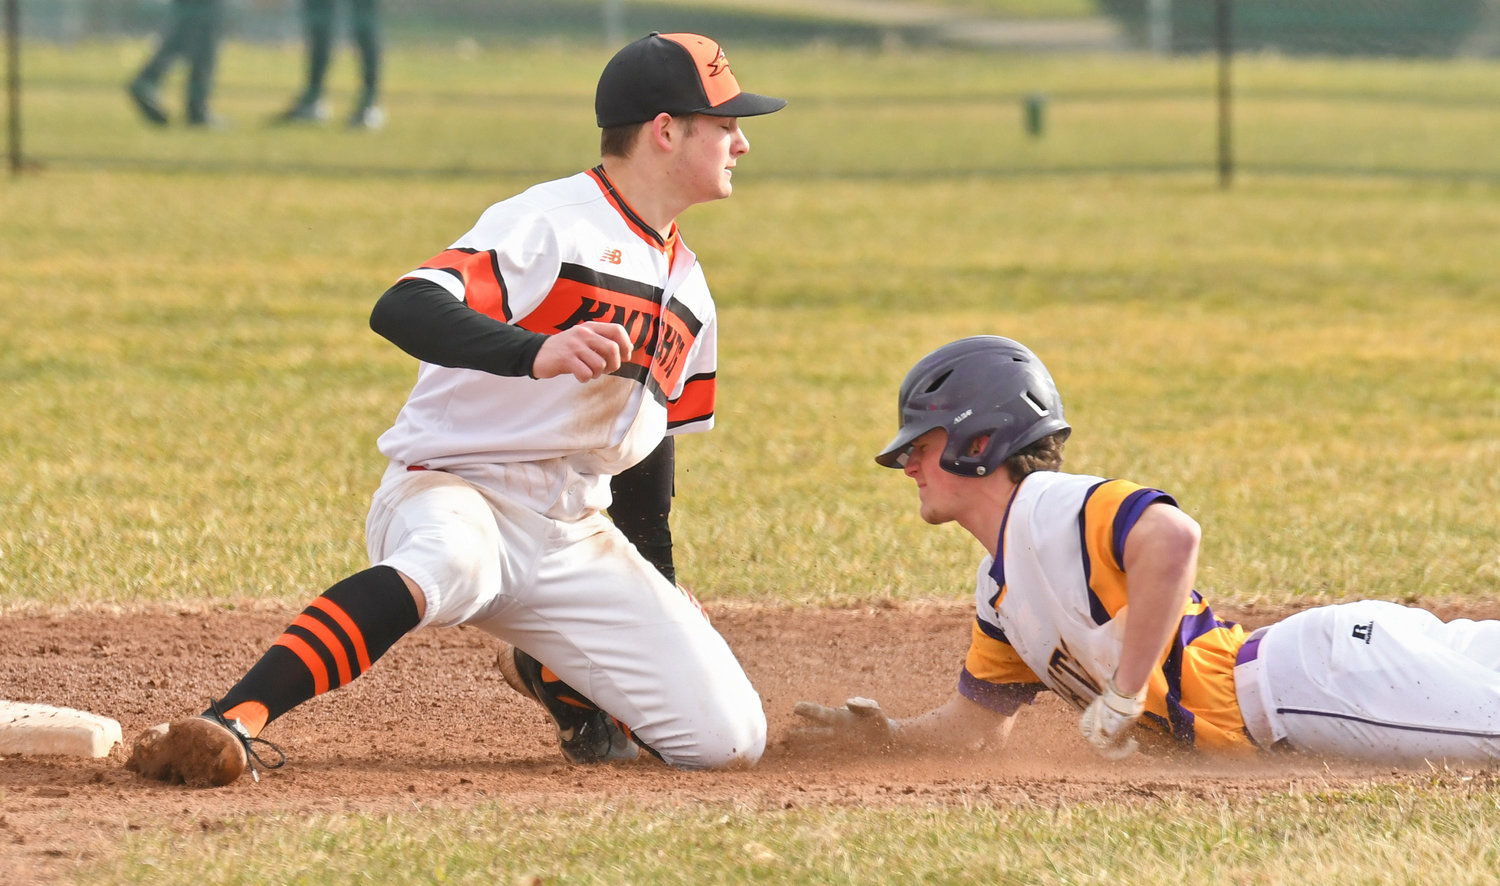 Holland Patent's Jeremy Kelly slides into second with a stolen base as Rome Free Academy shortstop Tanner Brawdy tries to make the tag in the second inning of Monday's game at RFA Stadium. Kelly scored later in the inning for a 1-0 lead but RFA won 10-6.